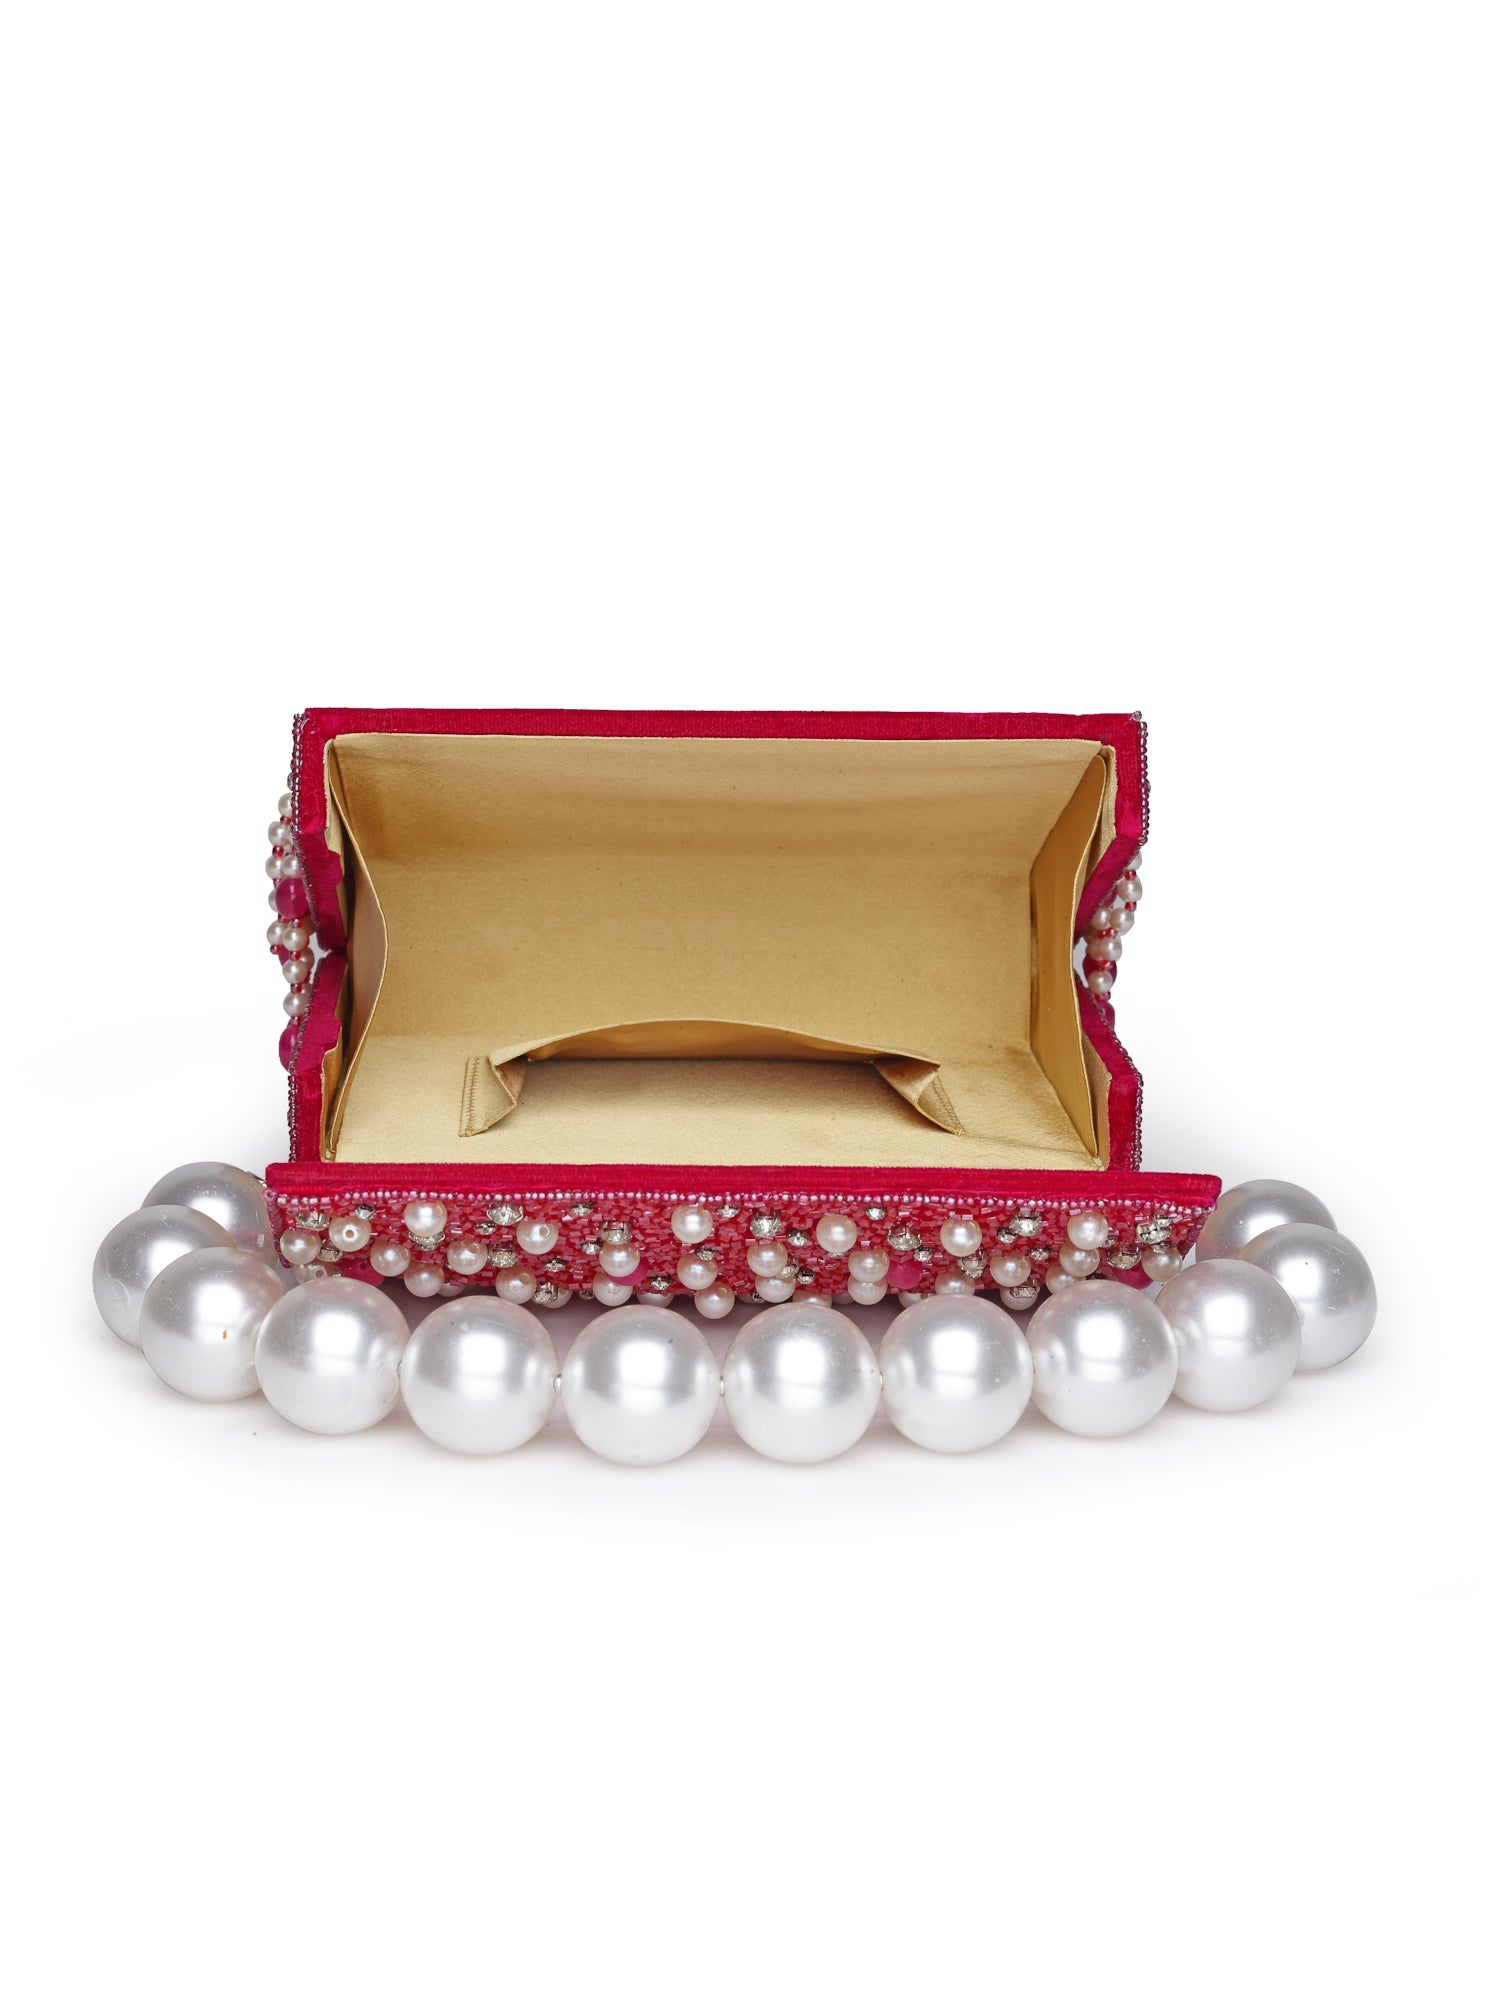 Geo Series Pearl and Crystal clutch